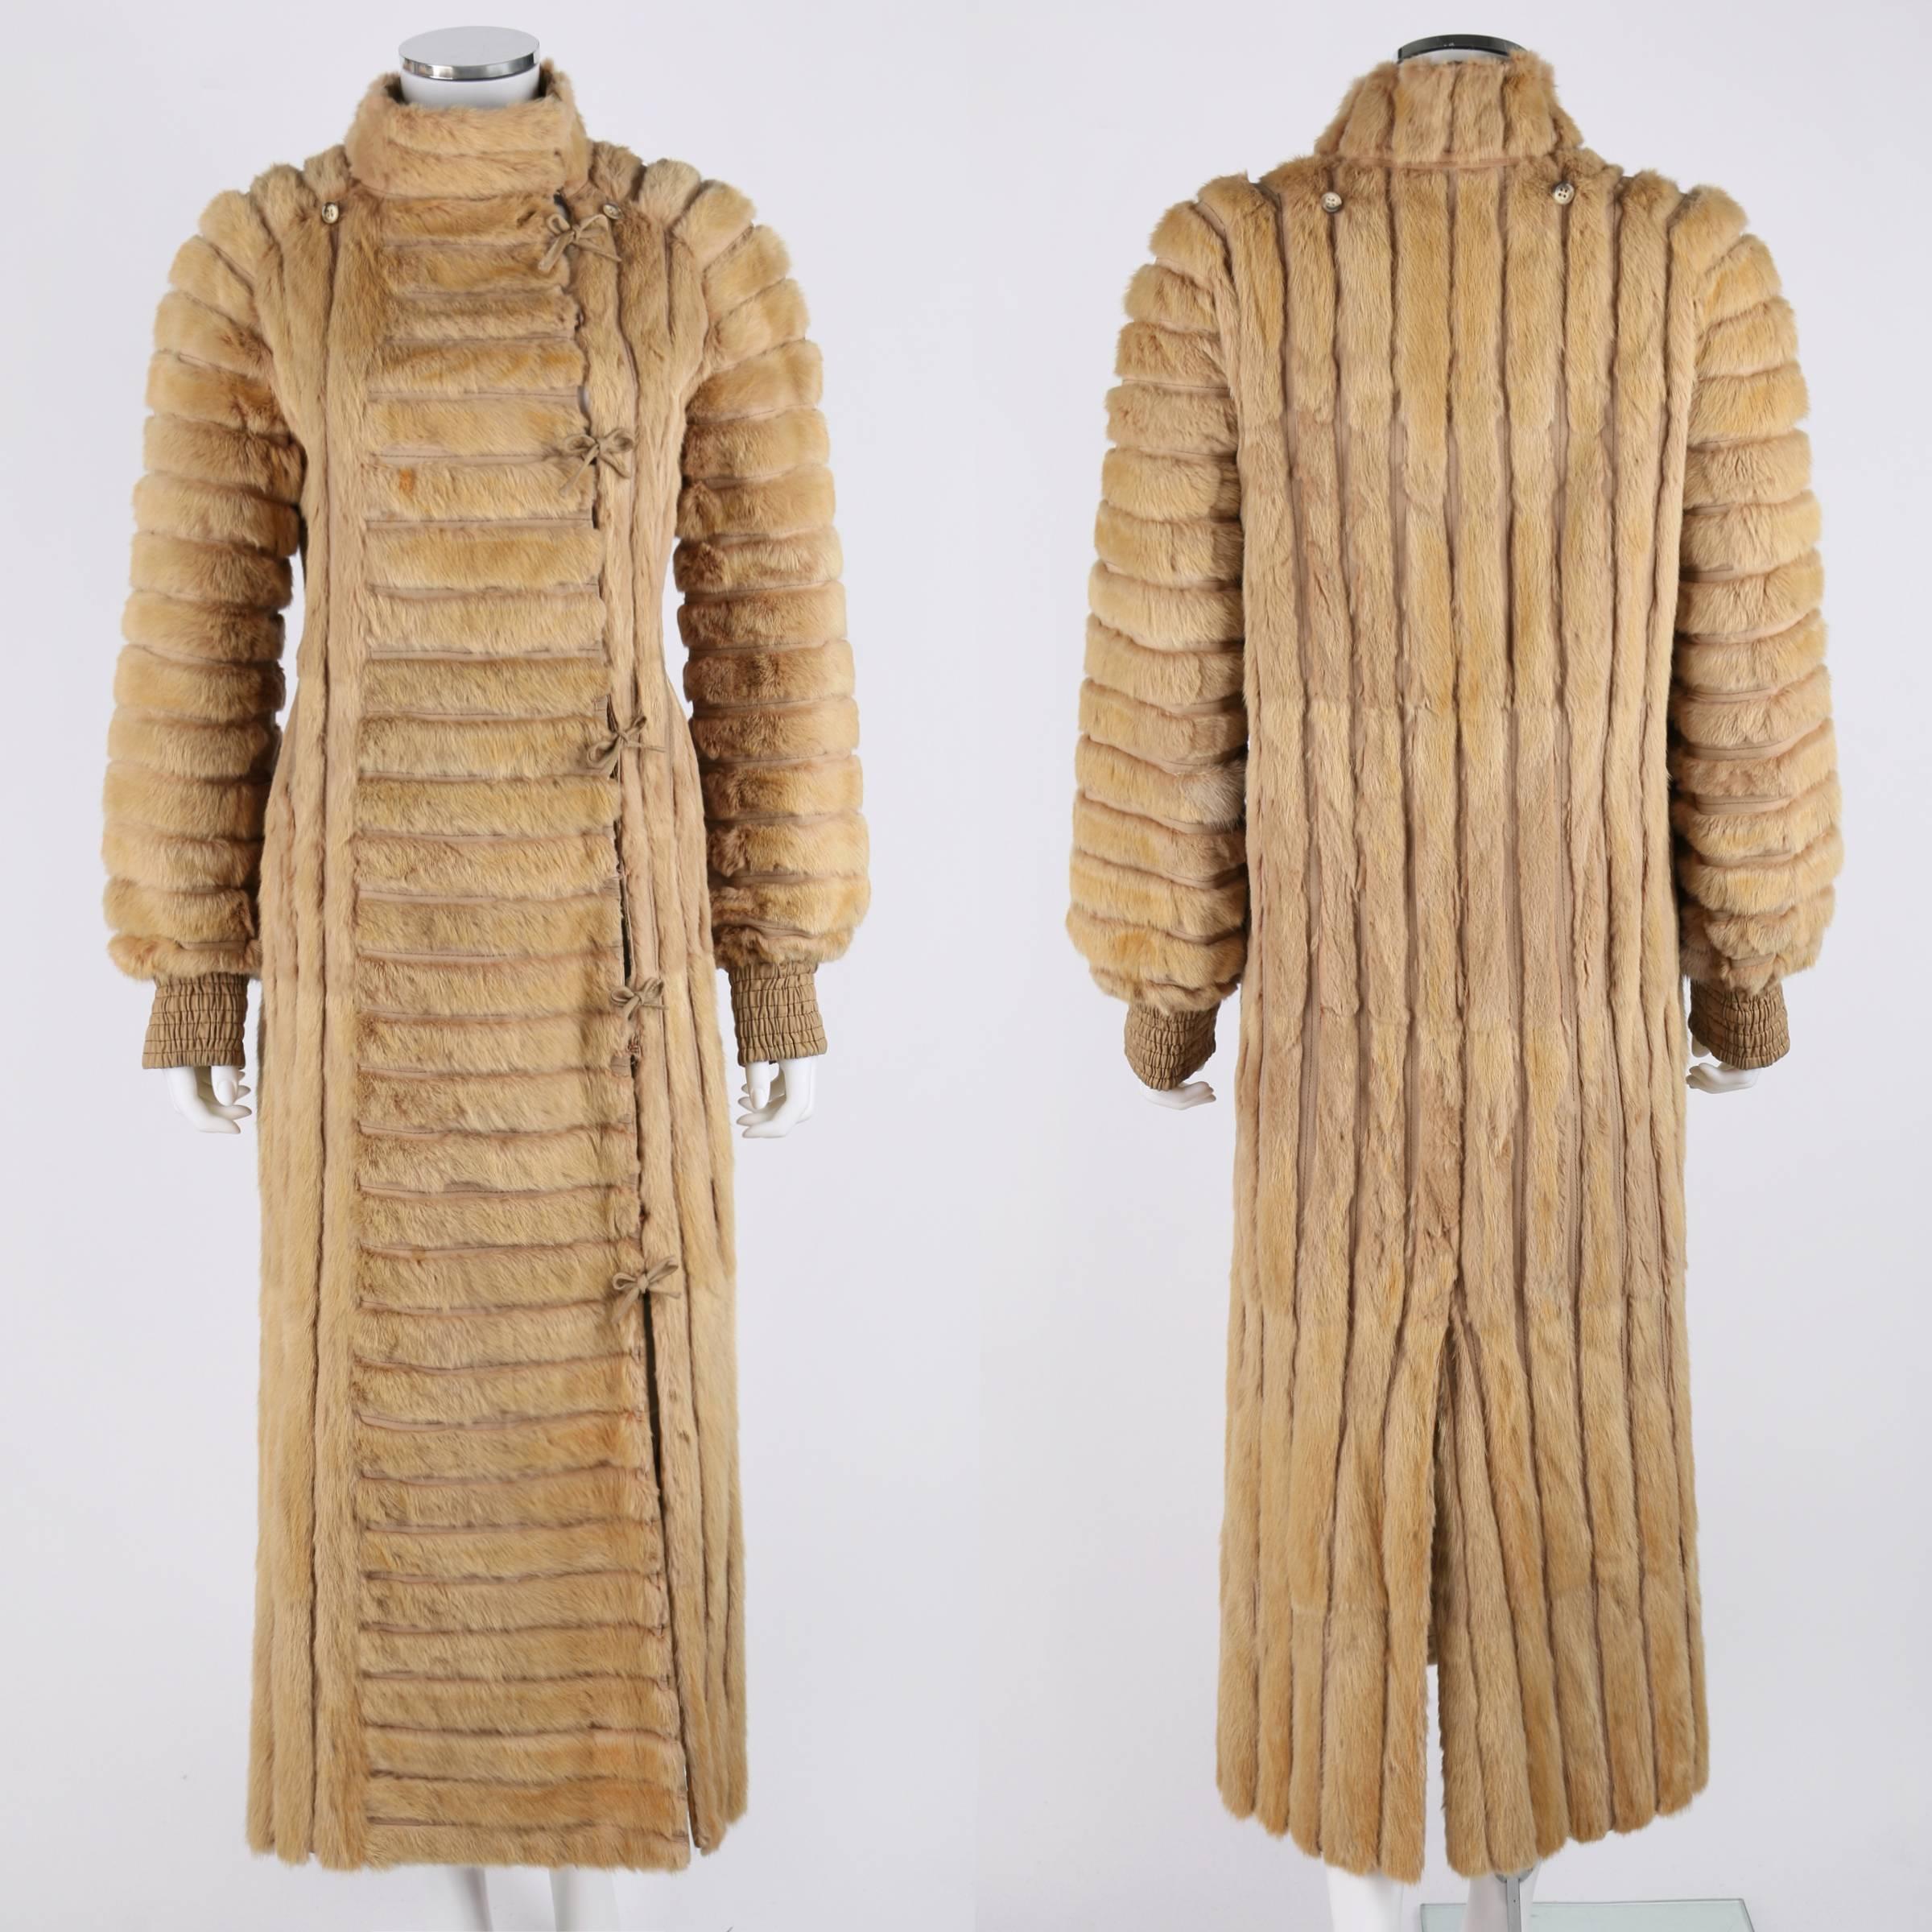 Vintage c.1970s Fendi Roma long blonde mink fur ribbed coat. Detachable hood with buttons. Long sleeves with wide elastic cuffs. Pocket on right side. Hand slit accessing interior on left side. Coat closes at front left side with hooks and ties.